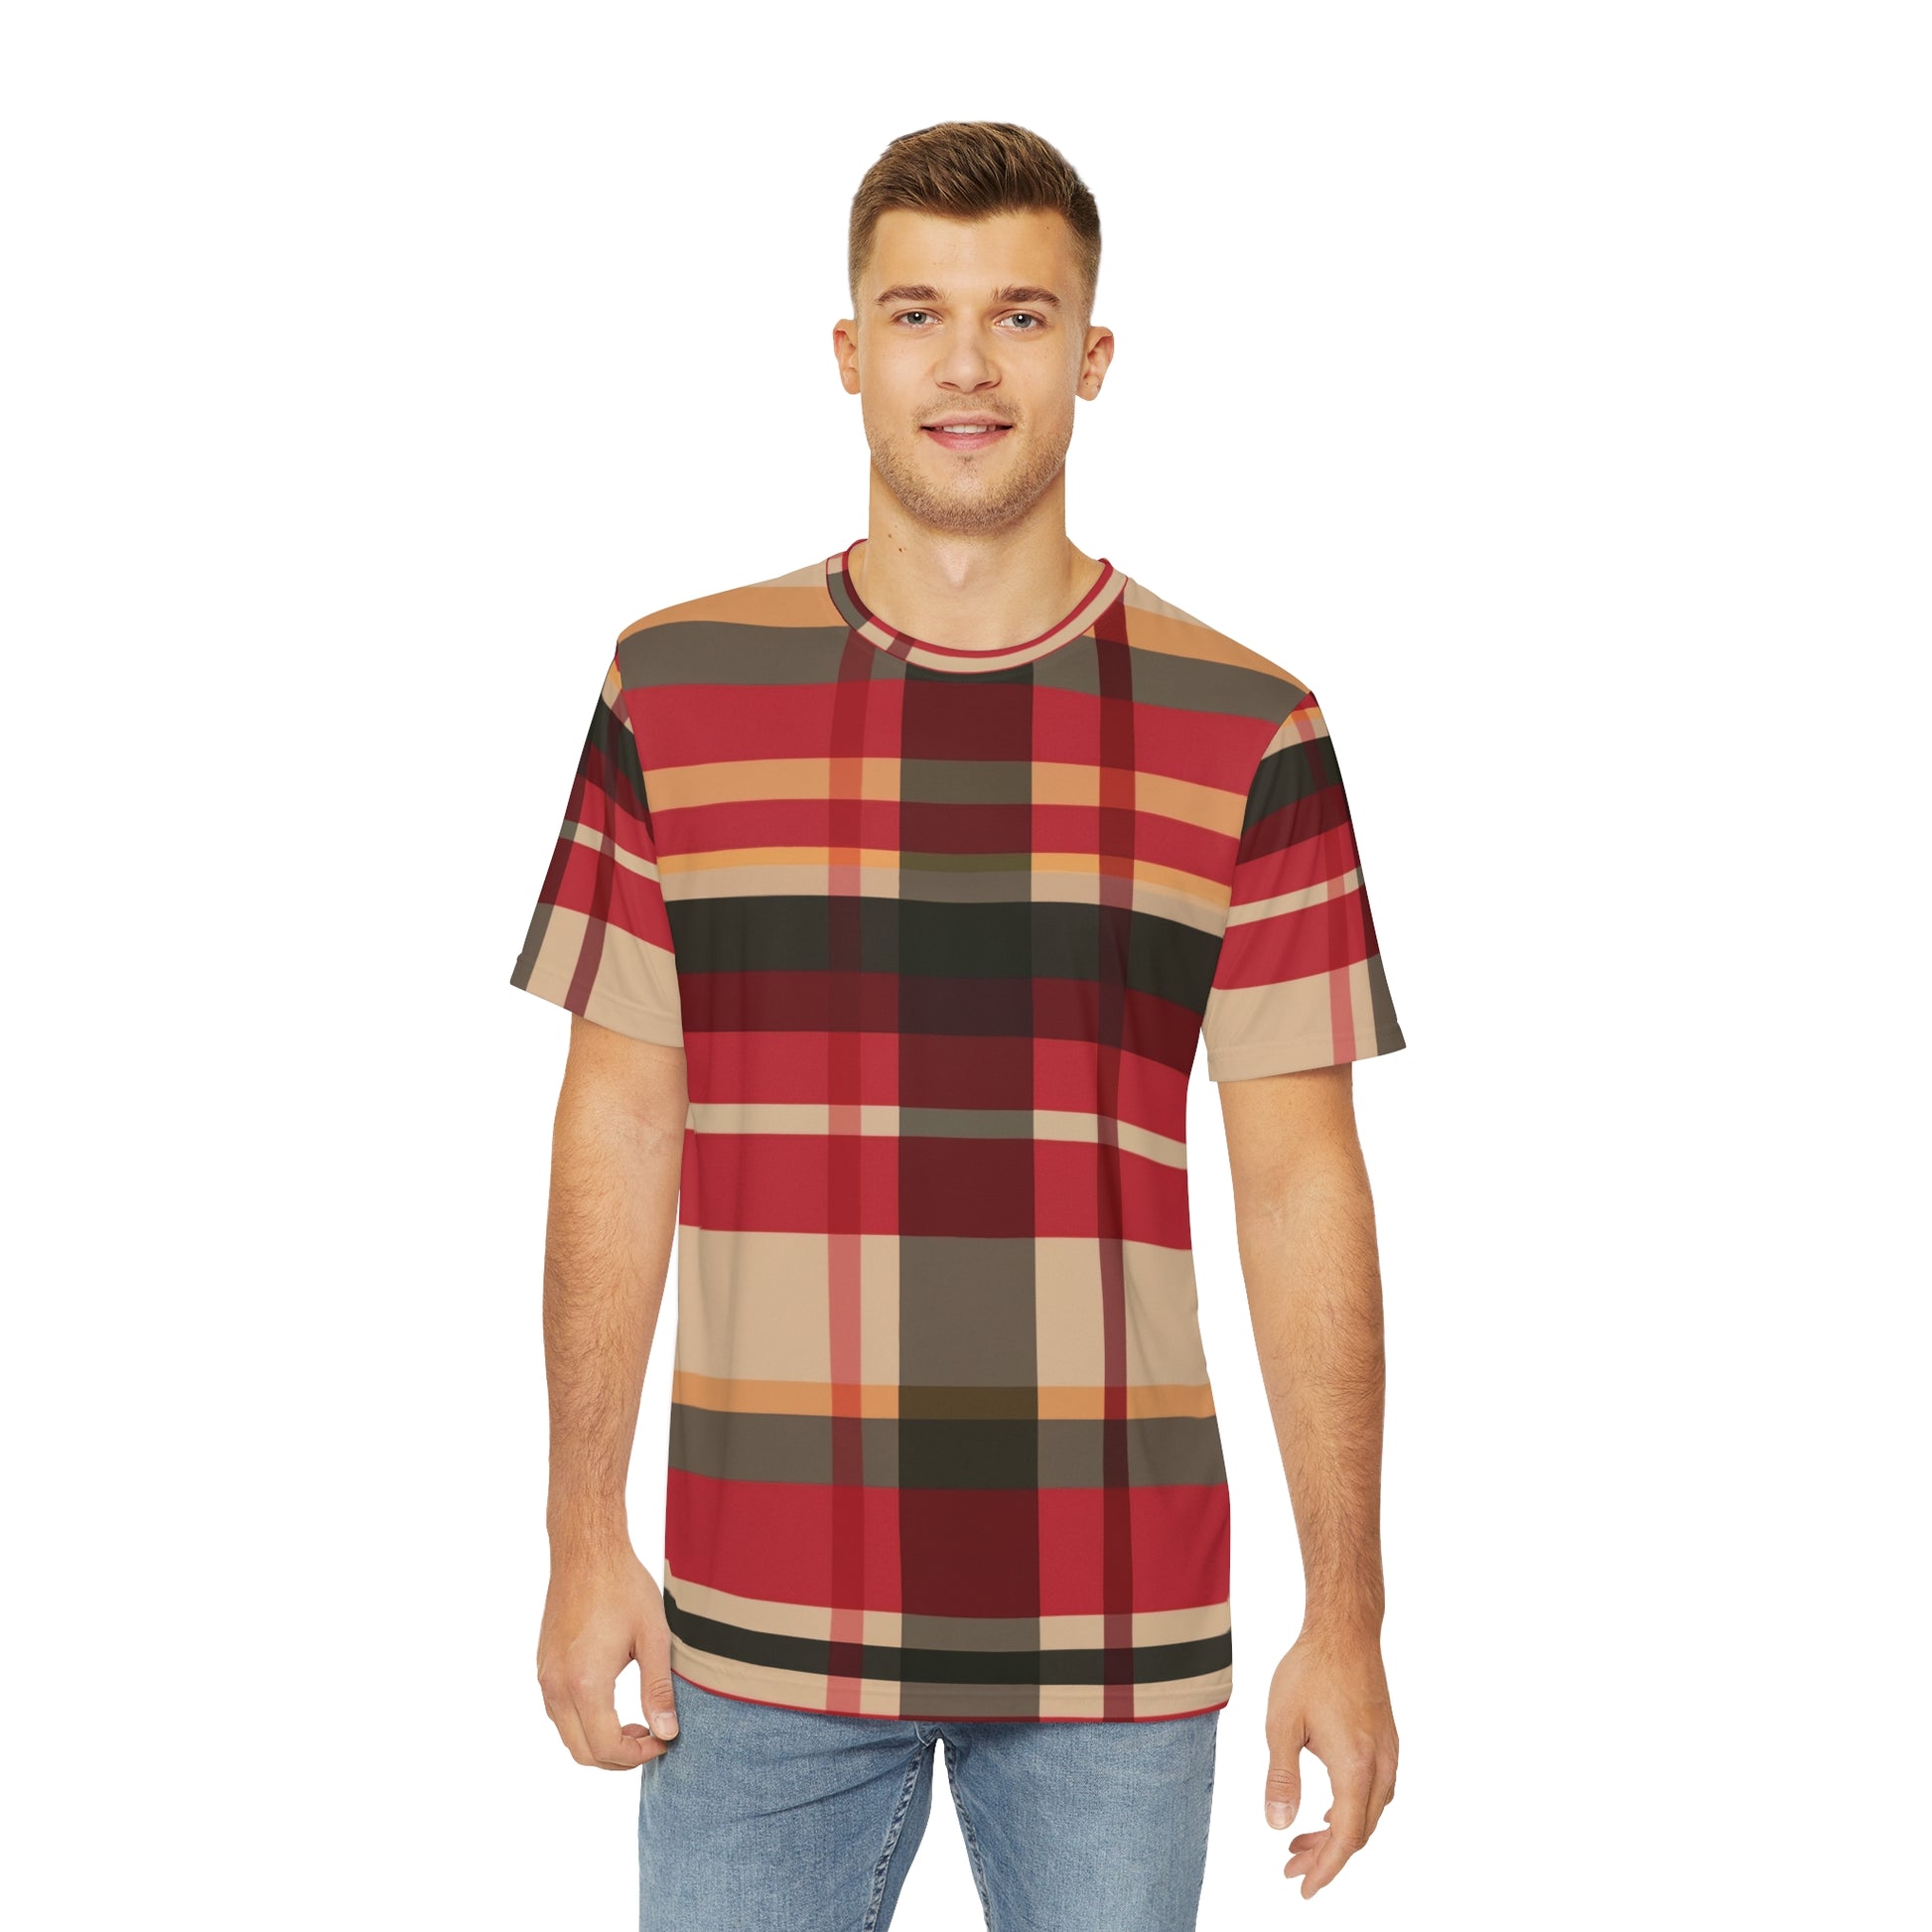 Back side of the McCloud Mist Tartan Crewneck Pullover Short-Sleeved All-Over Print Shirt red black and beige plaid pattern worn by a white male paired with casual denim jeans